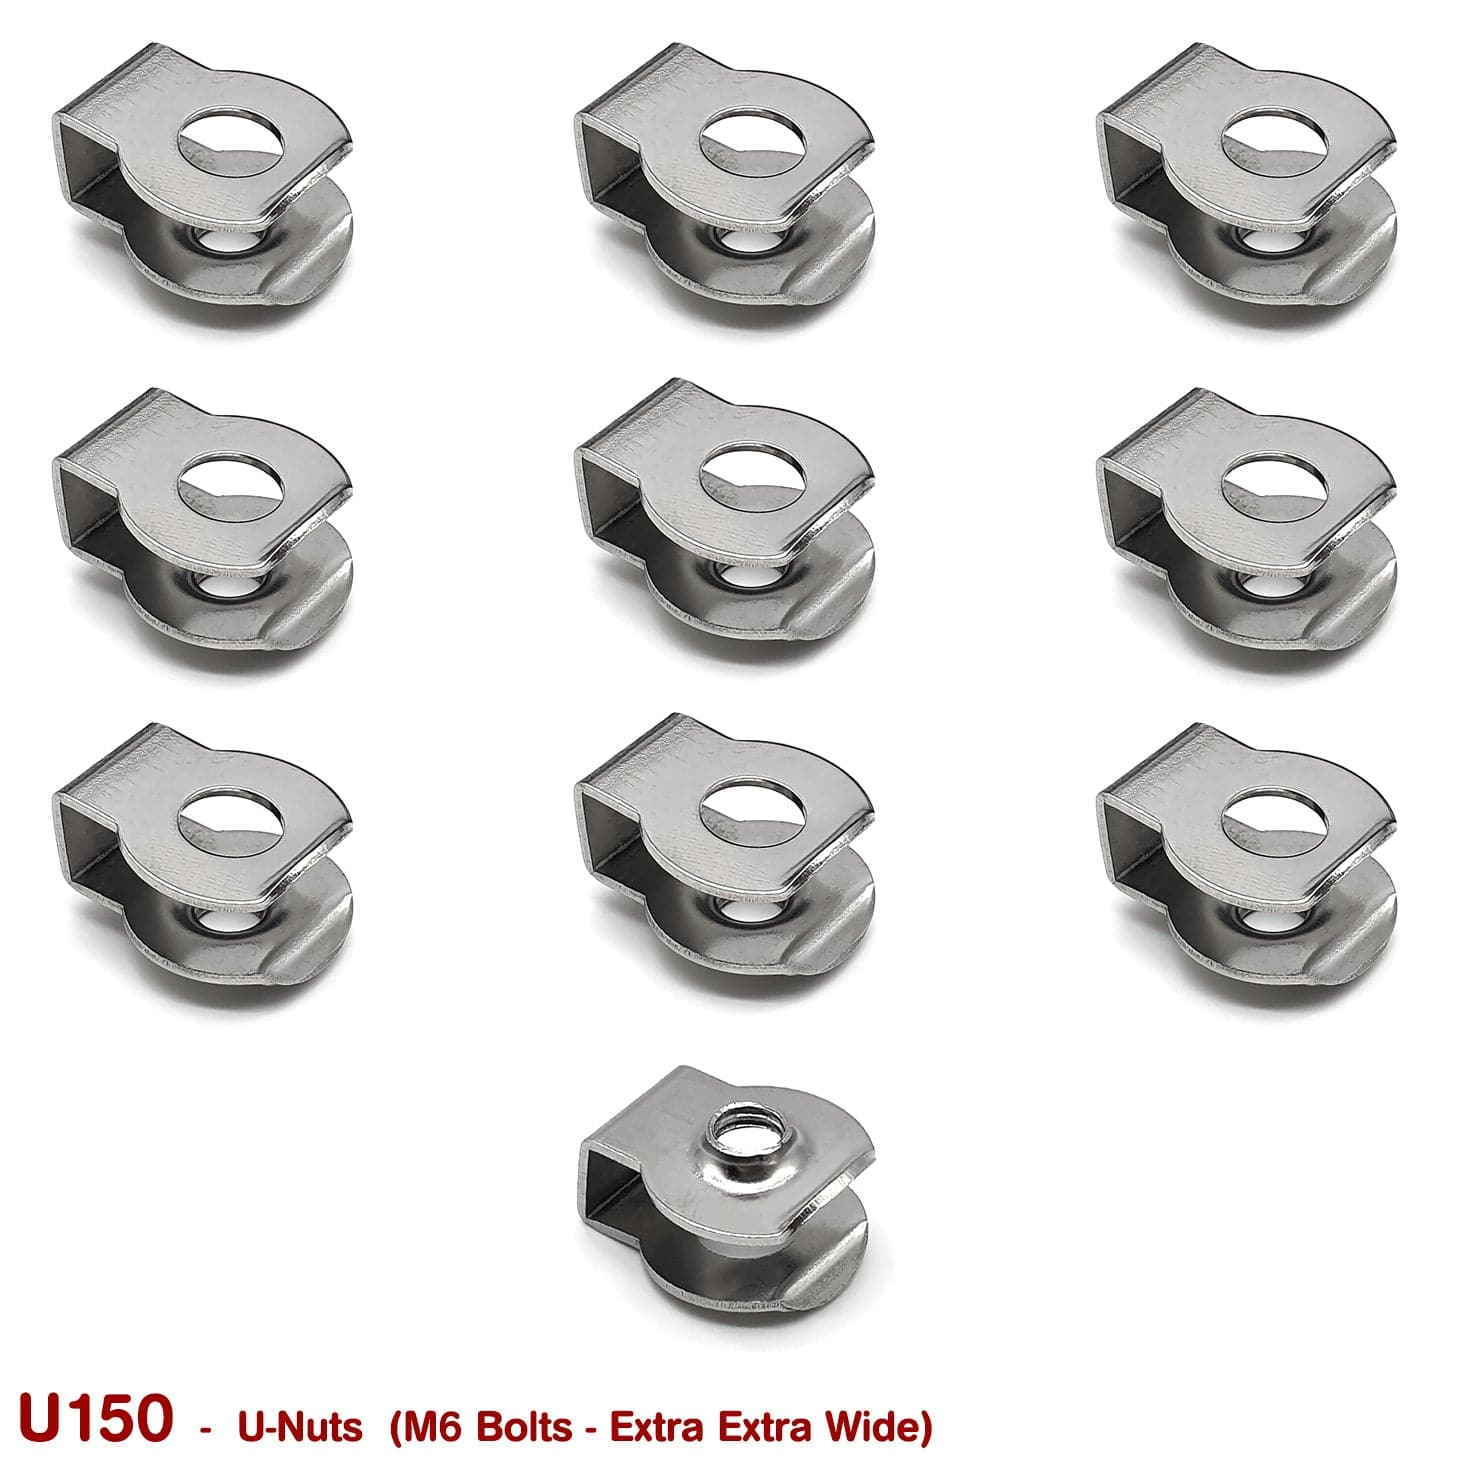 U-NUTS - M6 EXTRA WIDE  (STAINLESS STEEL)